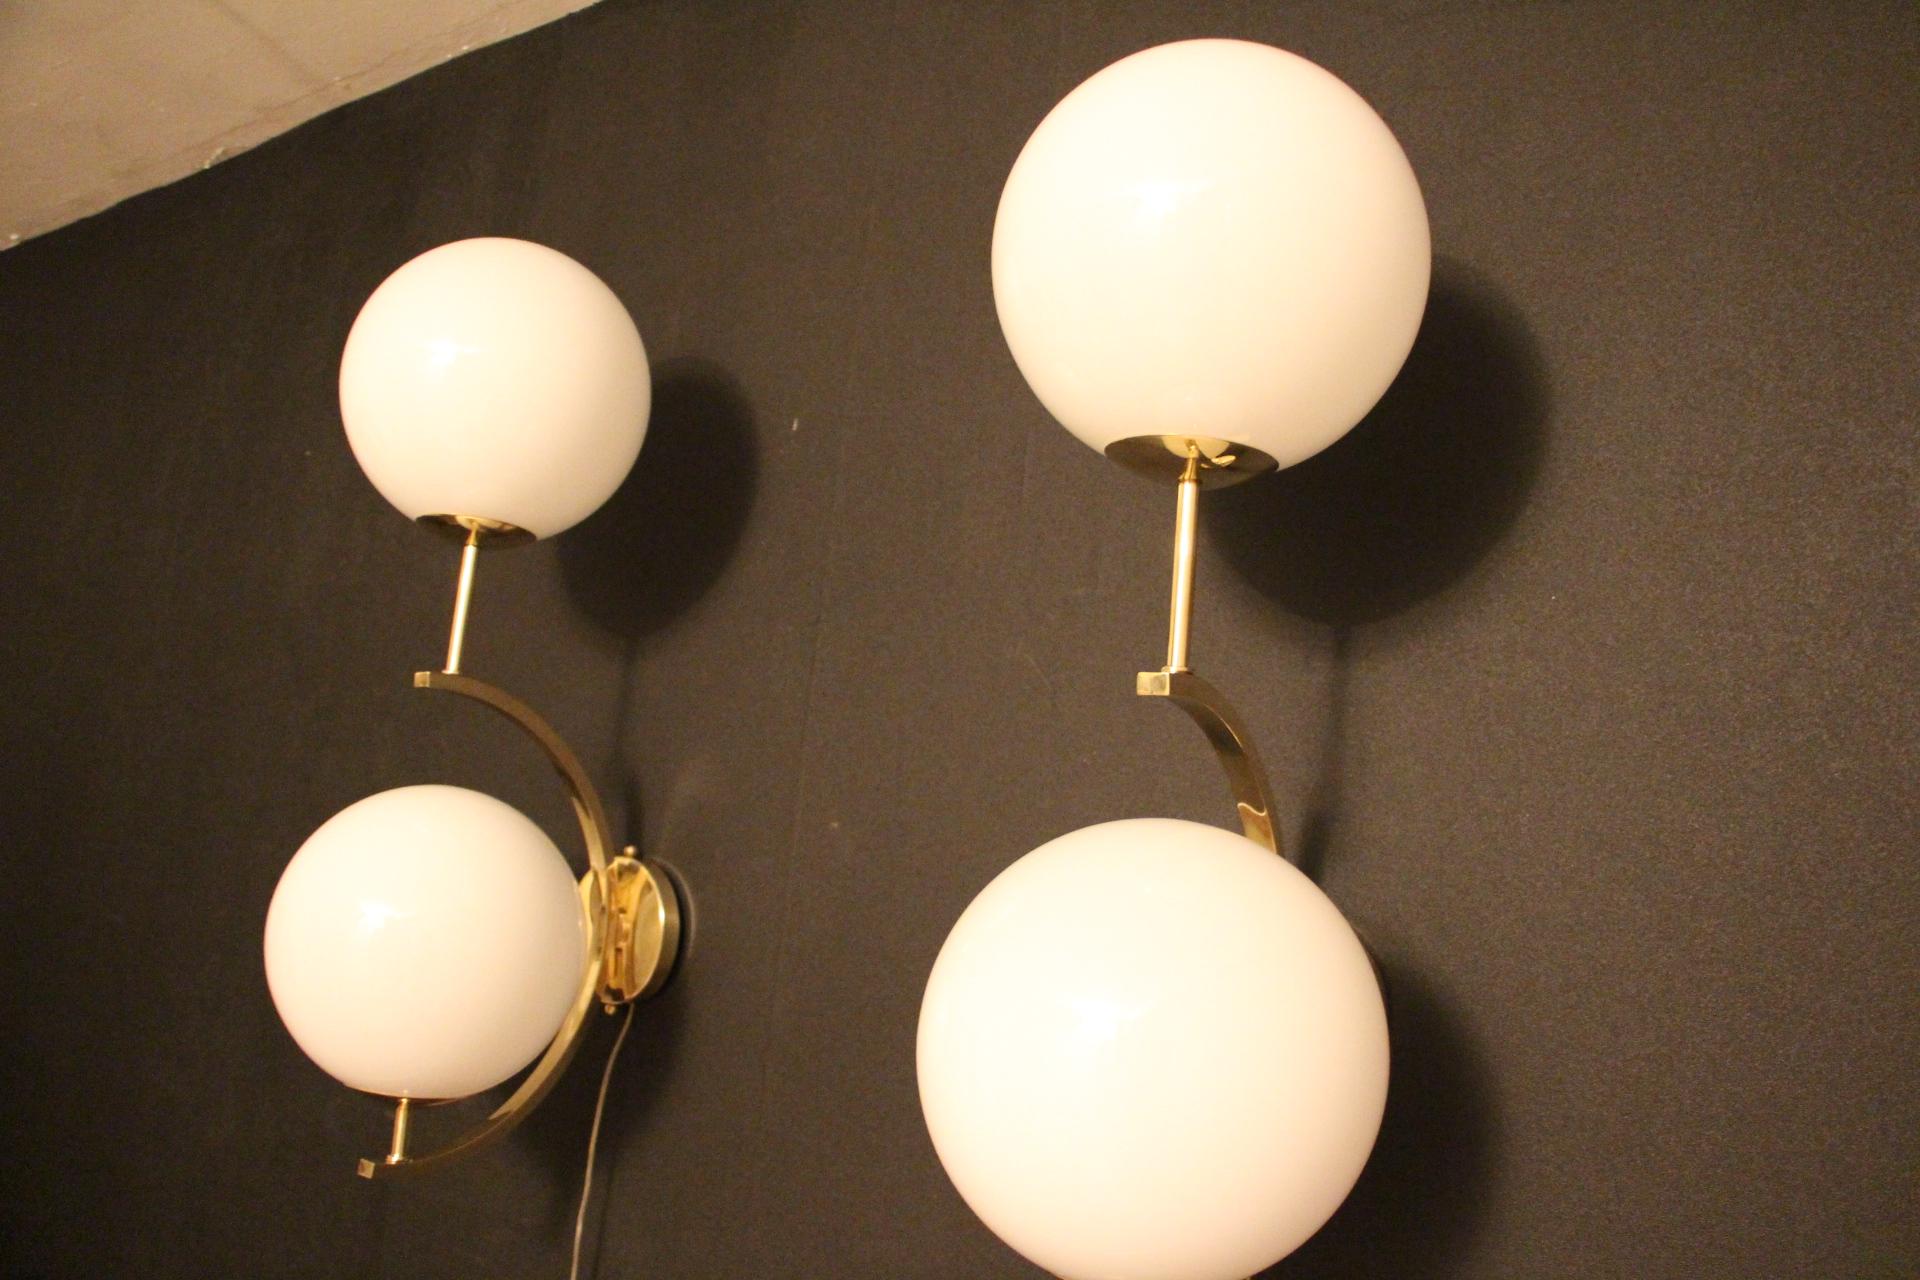 Italian Modern Midcentury Pair of Brass and White Glass Sconces, Wall Lights For Sale 4